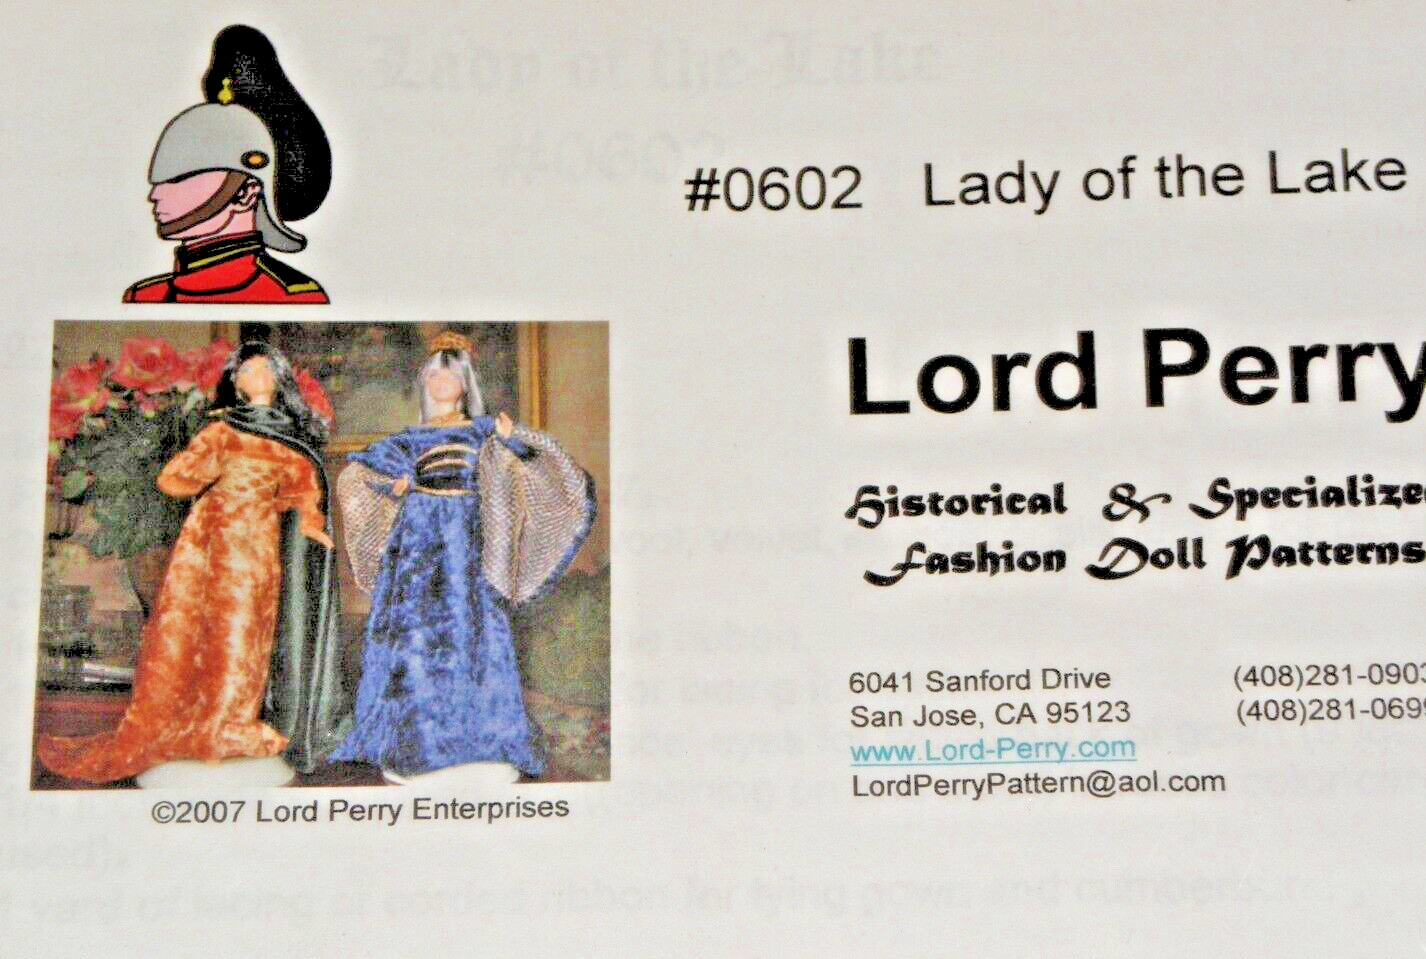 Lord Perry Fashion Doll Pattern LADY OF THE LAKE #0602